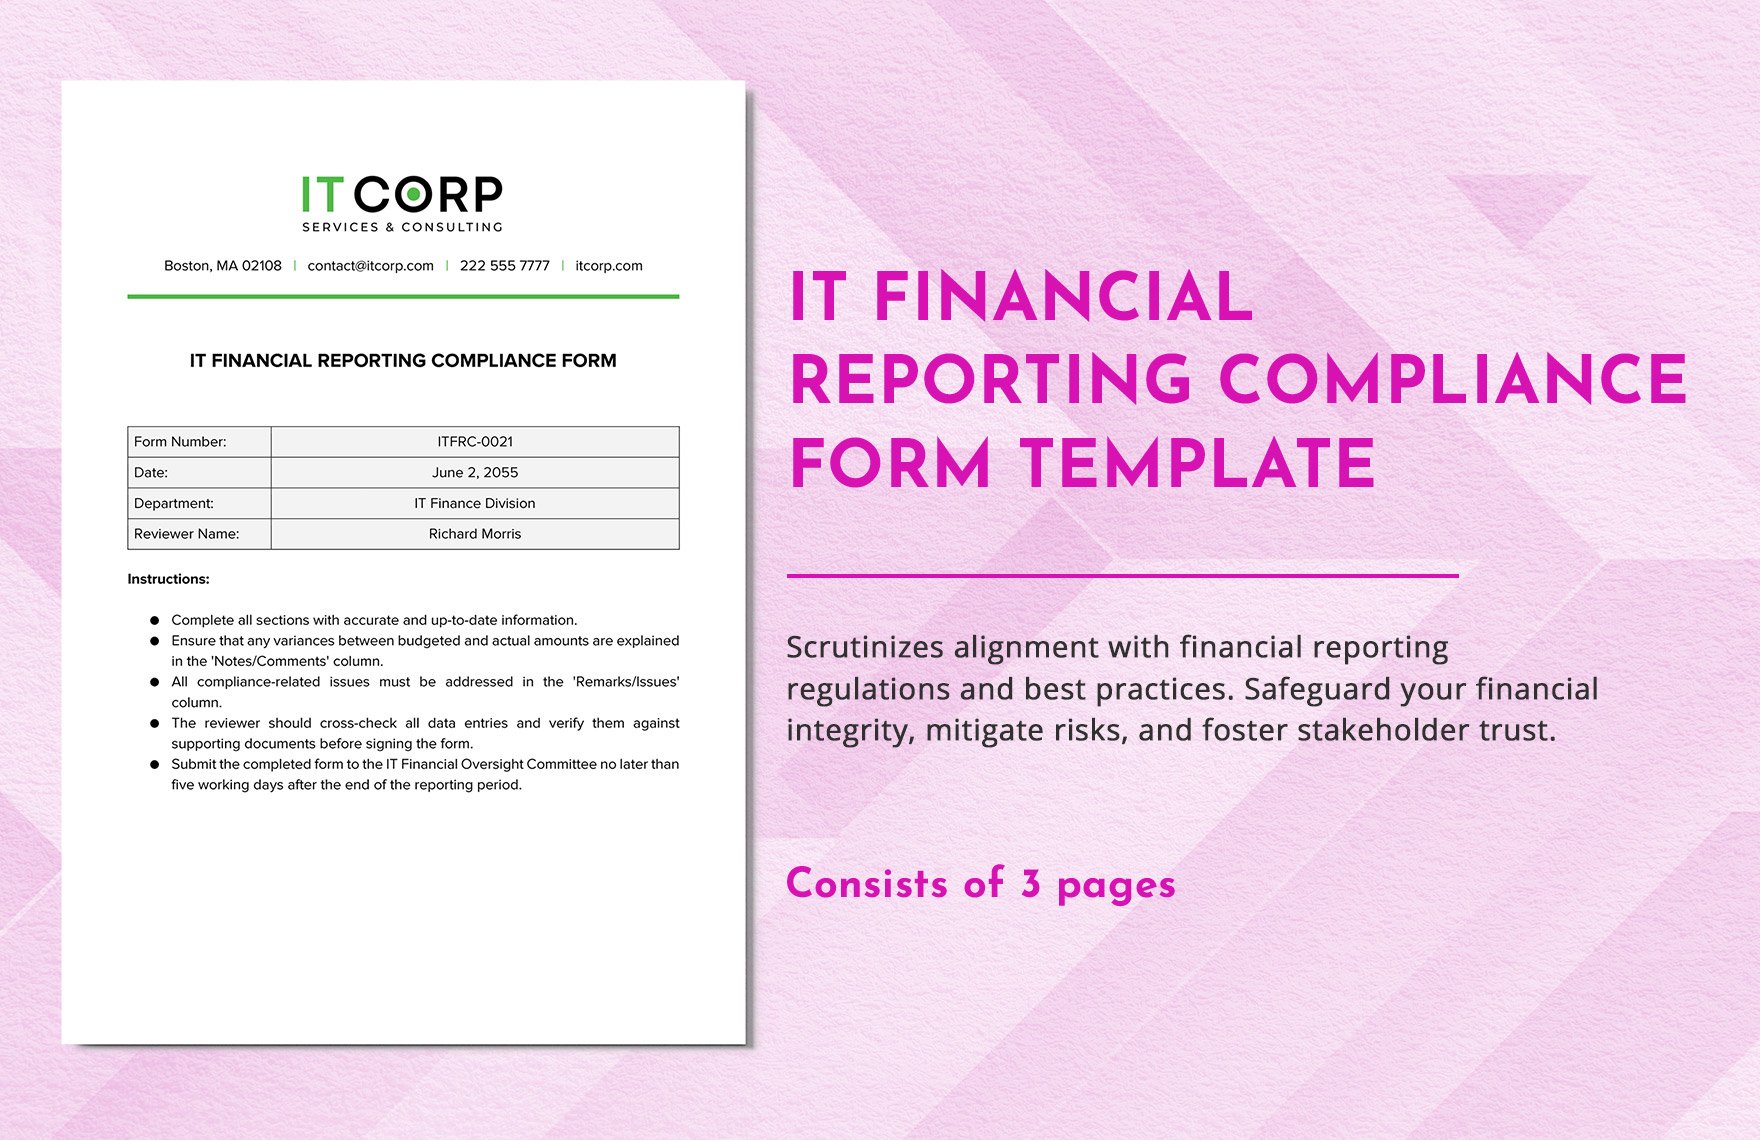 IT Financial Reporting Compliance Form Template in Word, Google Docs, PDF